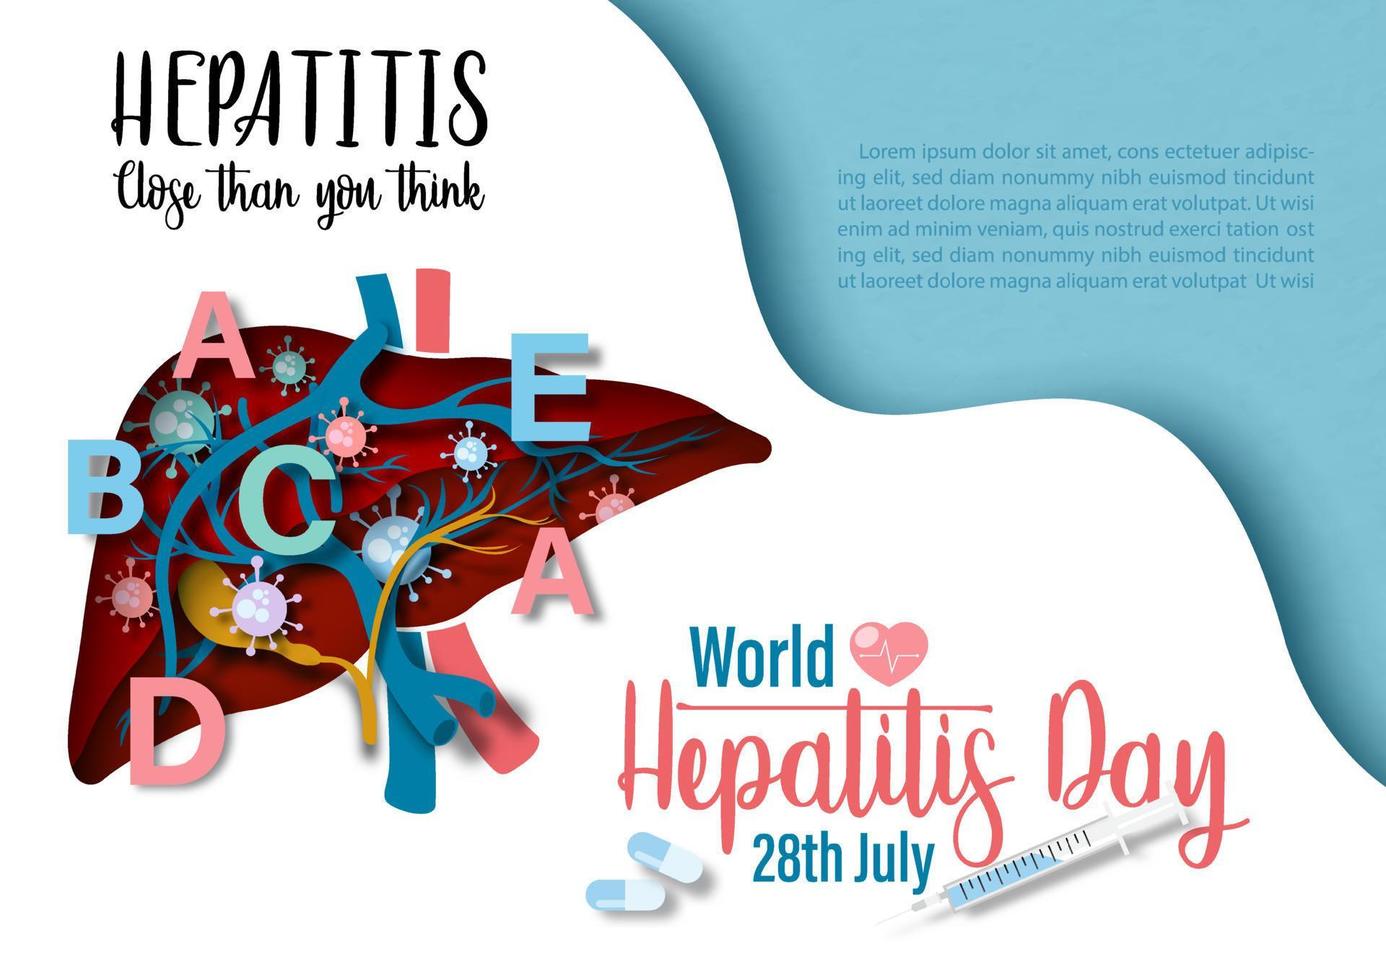 A human liver with English letters and hepatitis virus symbols, wording of world hepatitis day, example texts on white and blue background. World hepatitis day's poster campaign in paper cut style vector